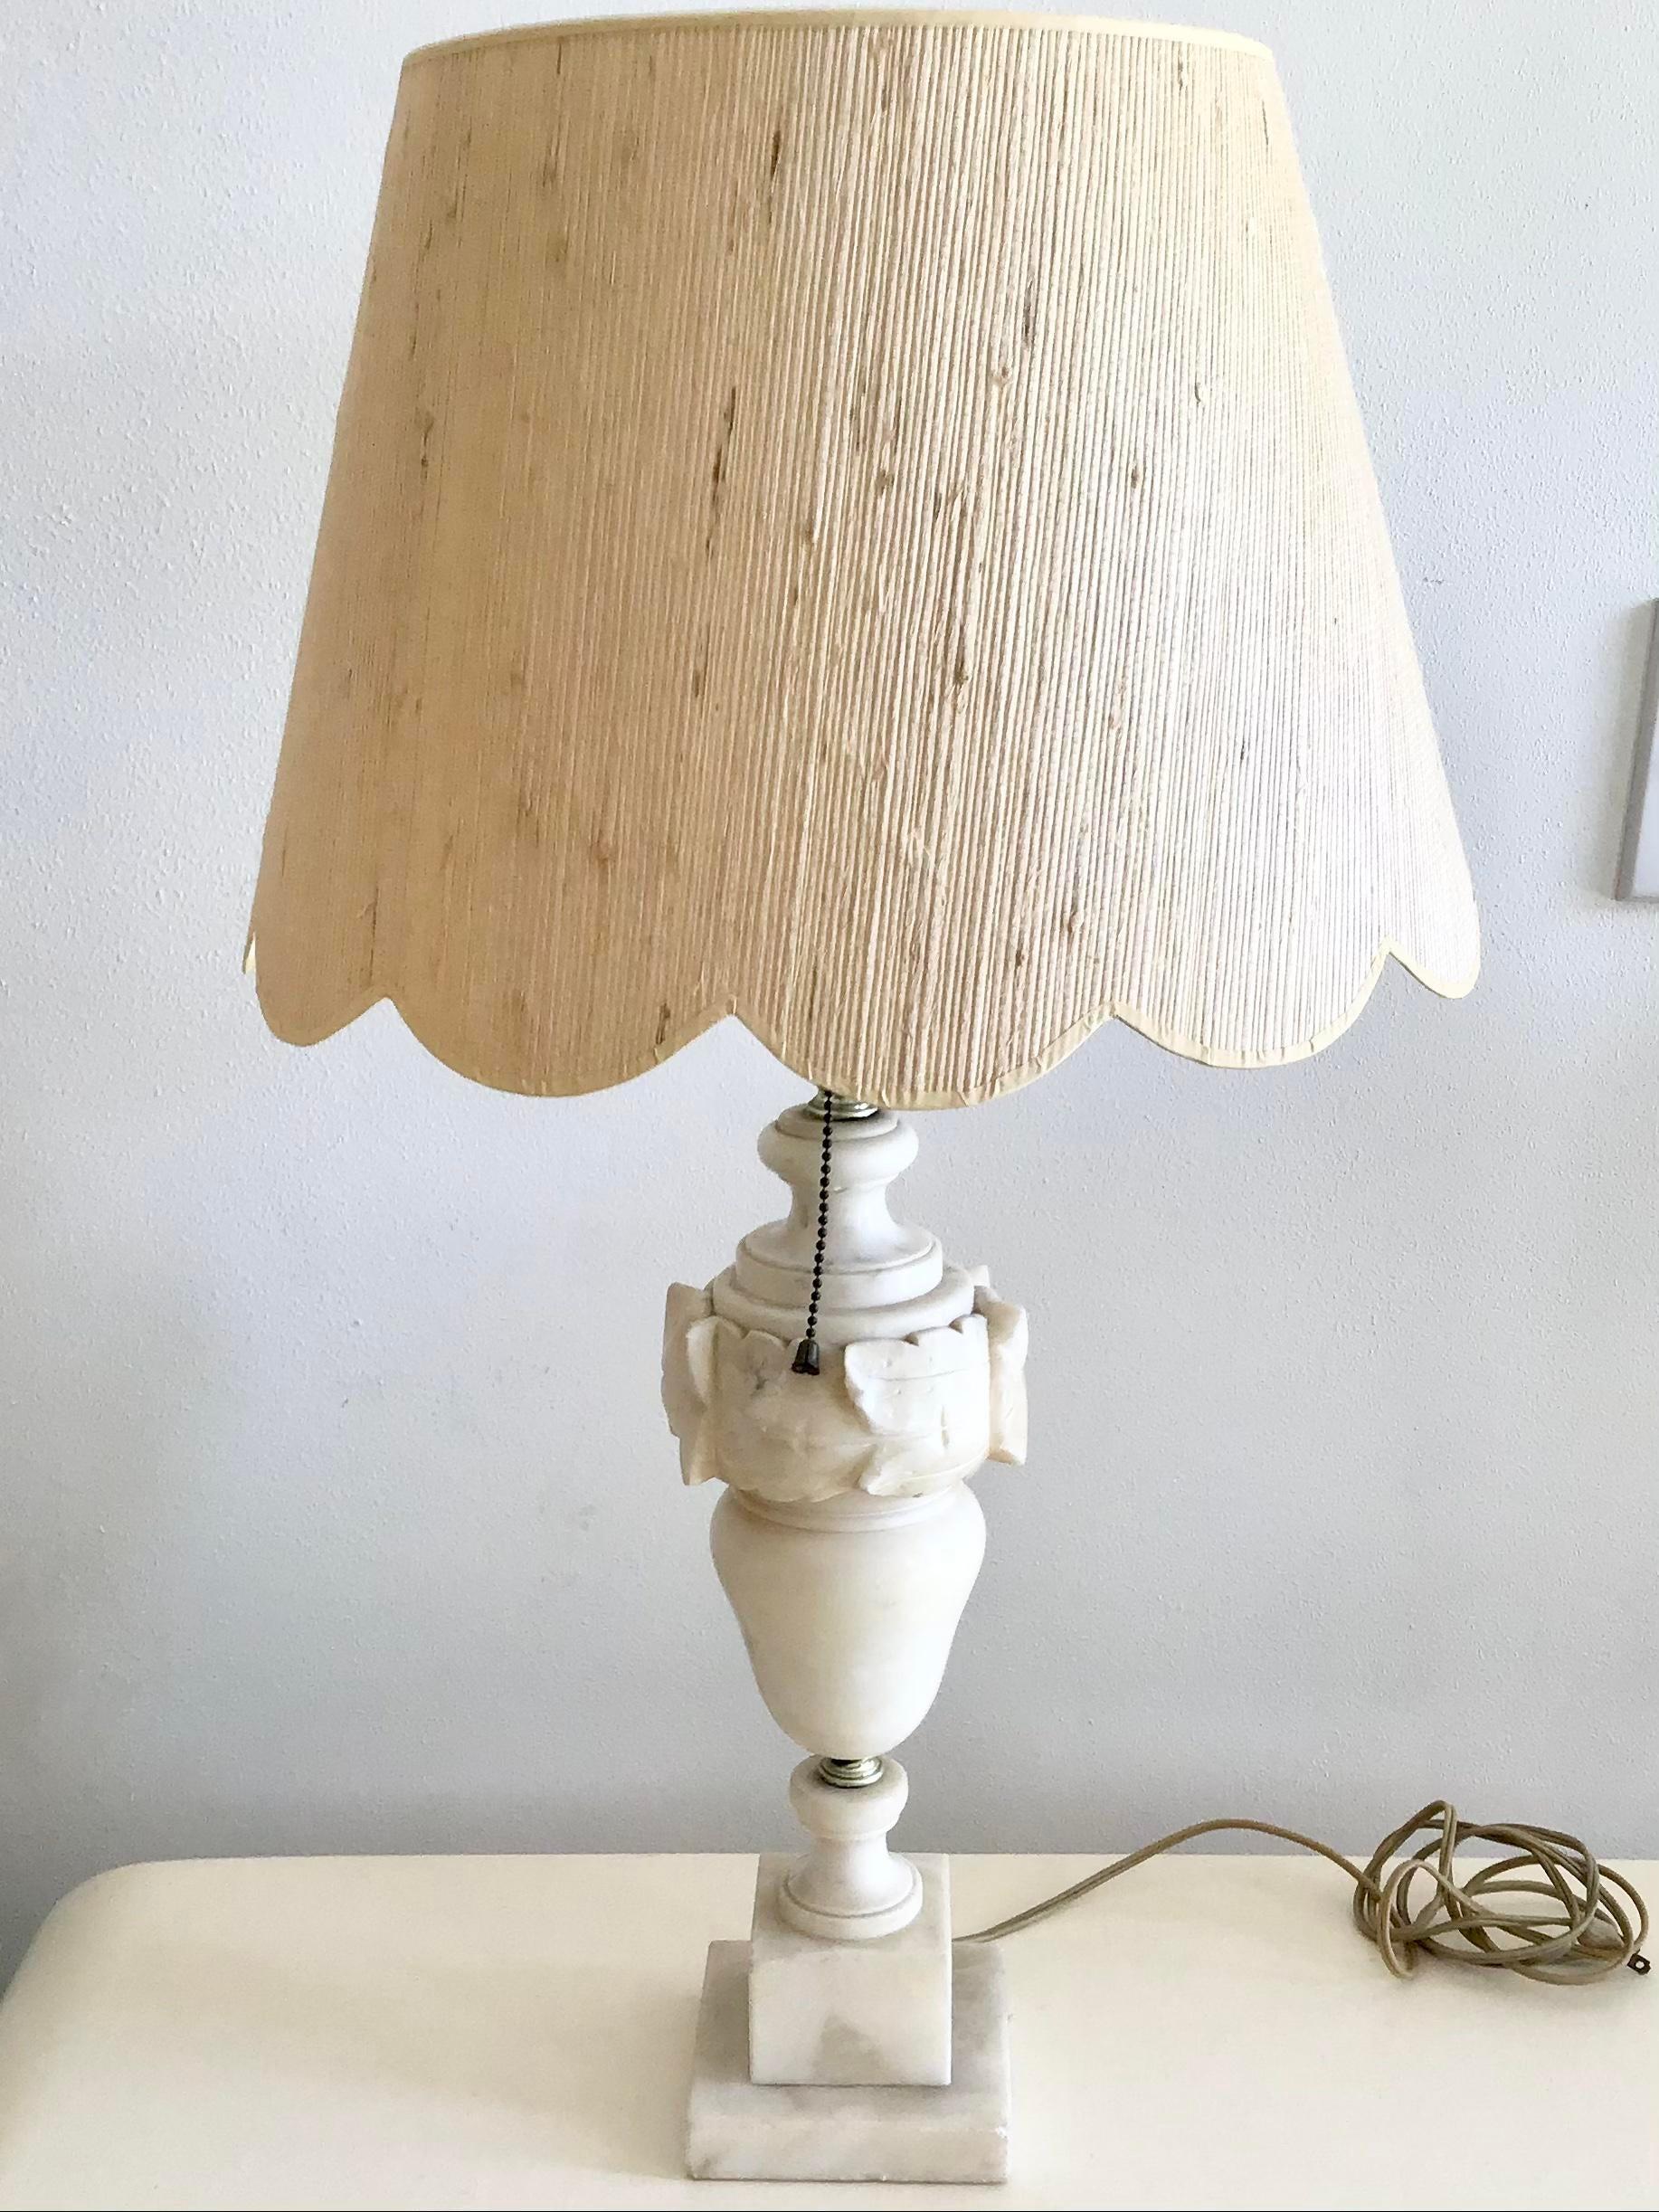 Super Cool Marble Urn Form Table lamp with custom Raffia Lamp Shade. Really Great Design and will be a lovely addition to your interiors.